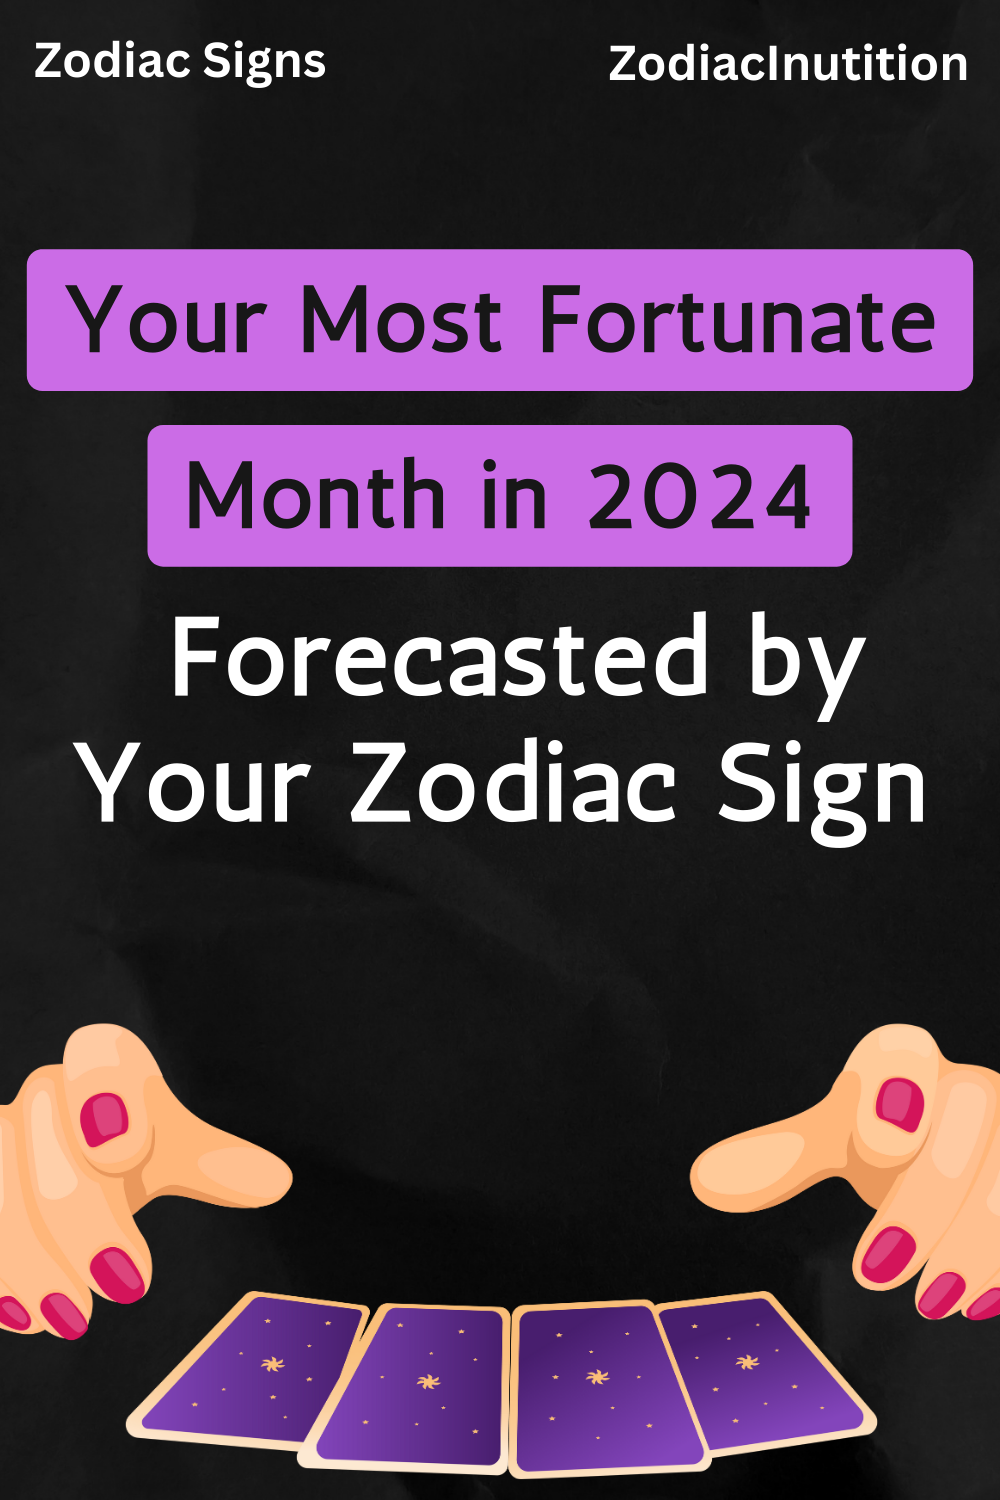 Your Most Fortunate Month in 2024 Forecasted by Your Zodiac Sign